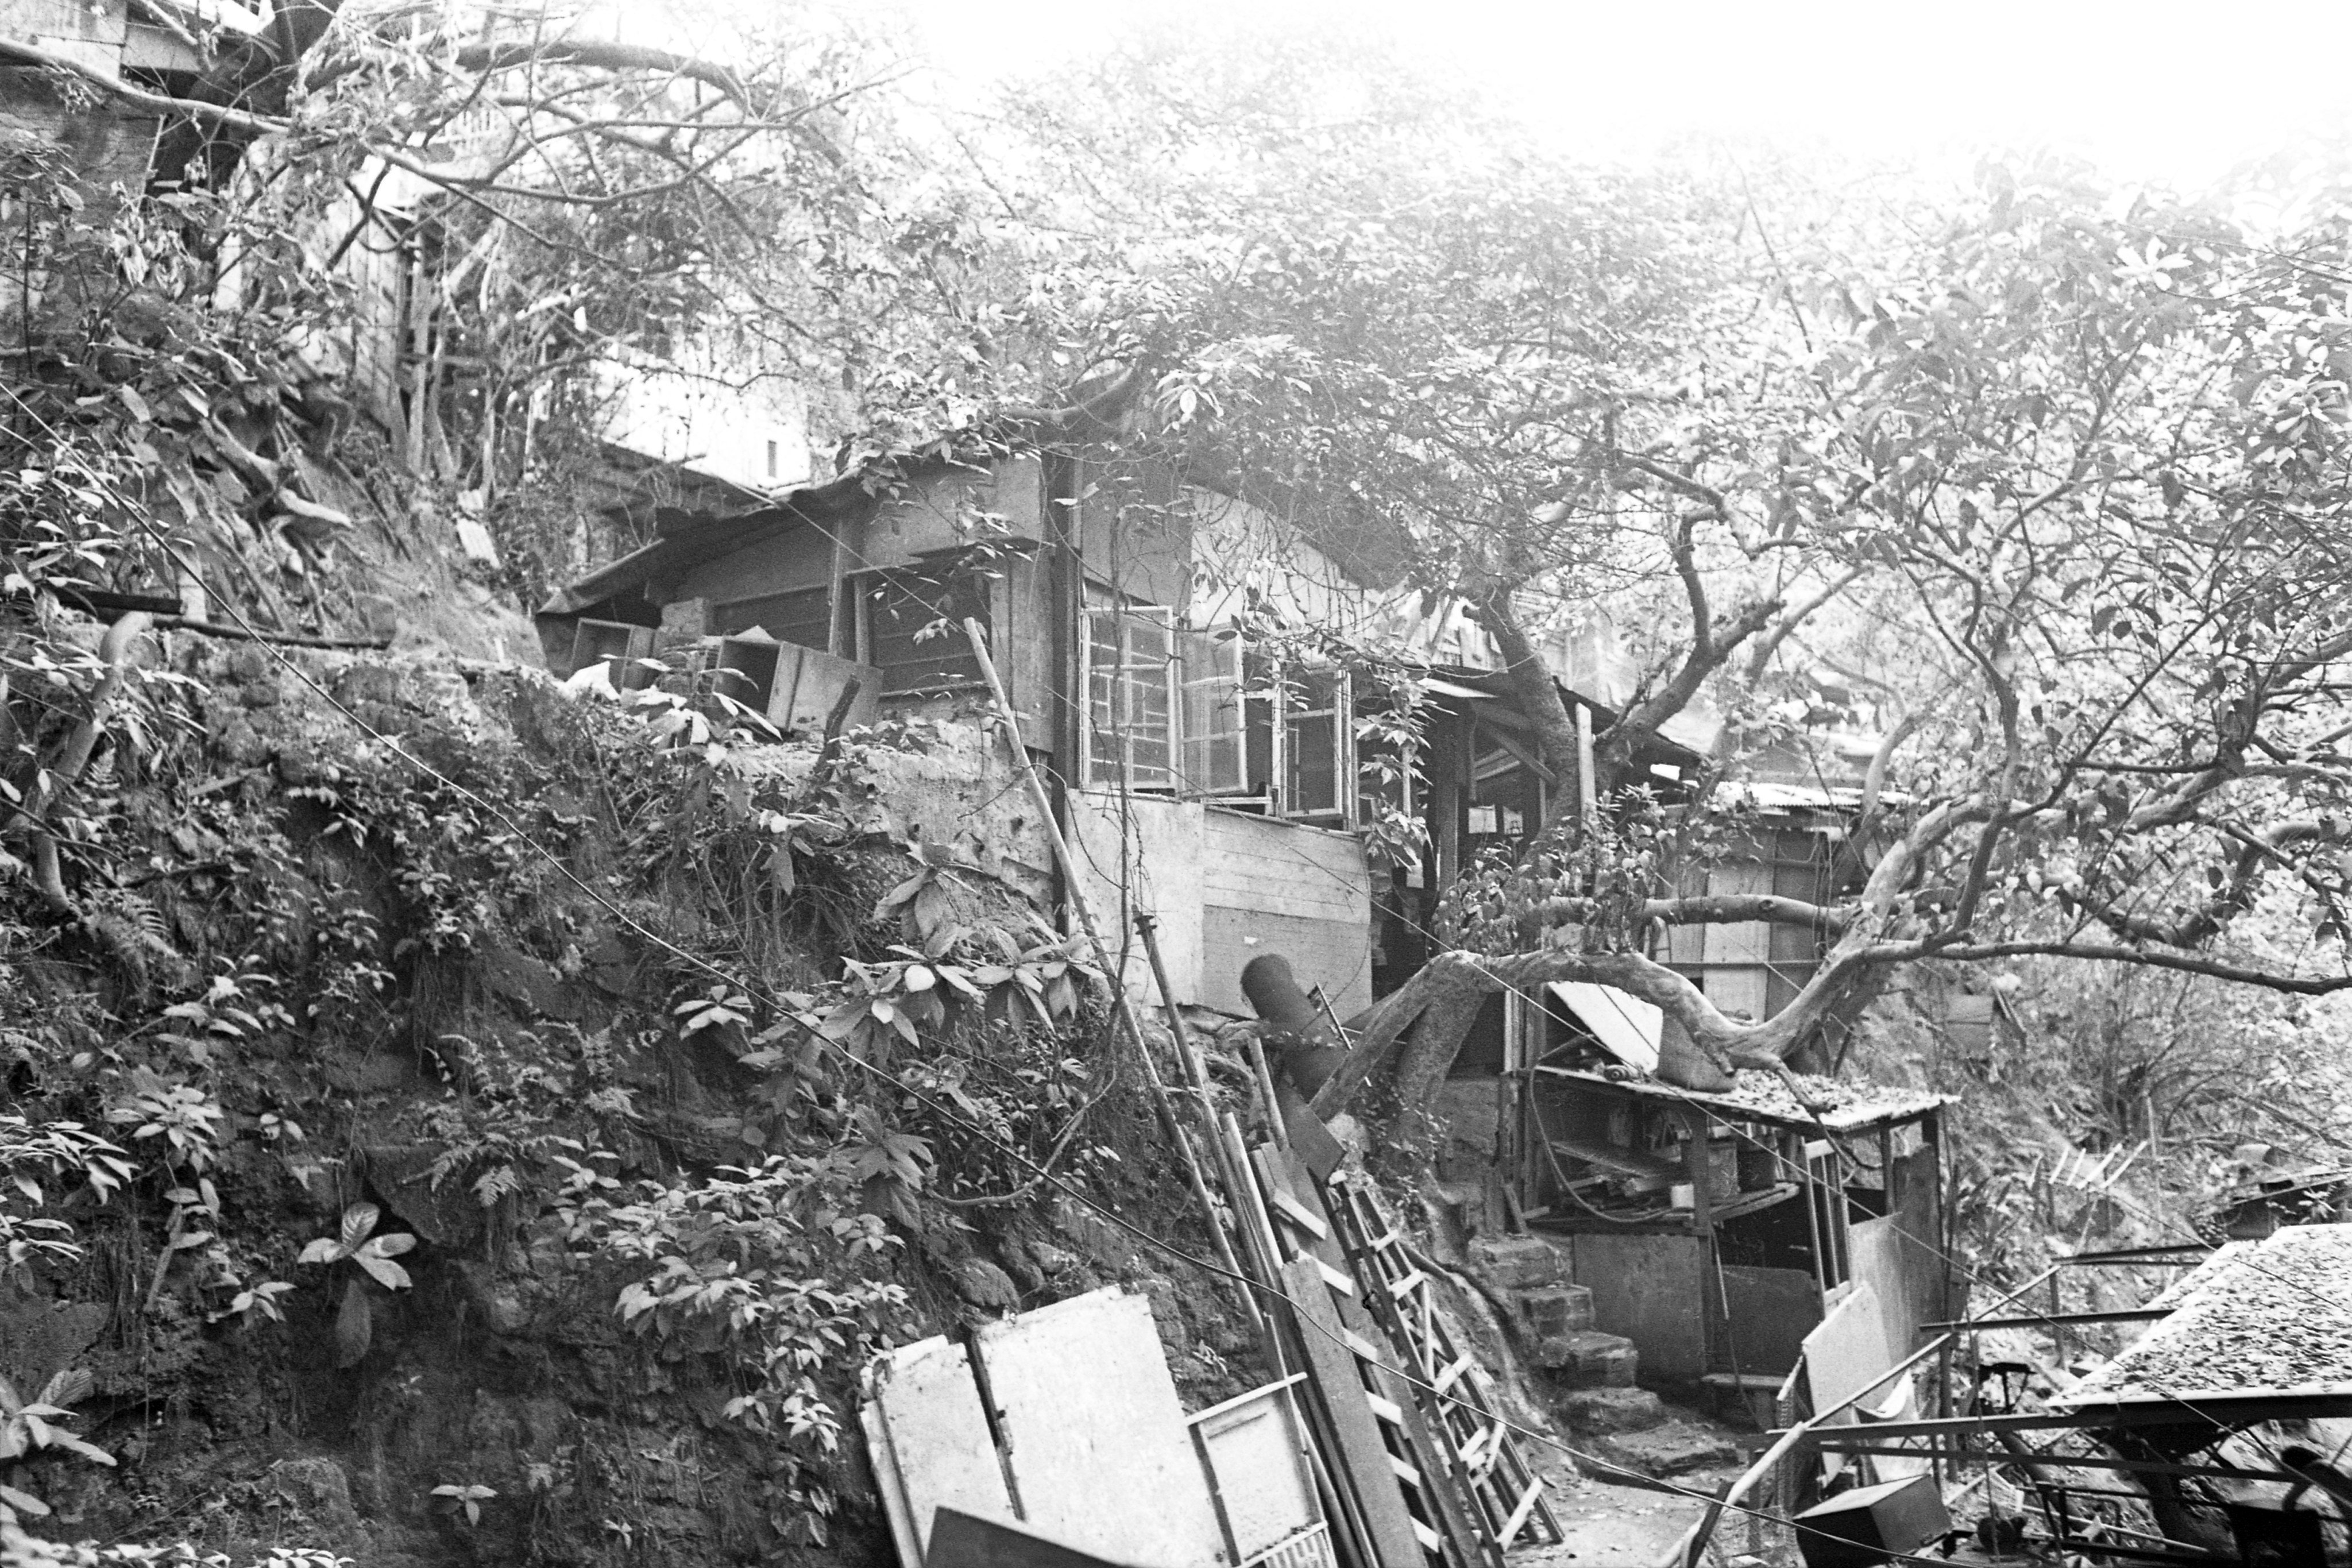 Squatter huts alongside Mount Parker Road in Quarry Bay in 1977. A legacy of such squatter areas in Hong Kong that were cleared but not concreted over for public housing is the trees and plants settlers left behind when they were moved out. Photo: SCMP